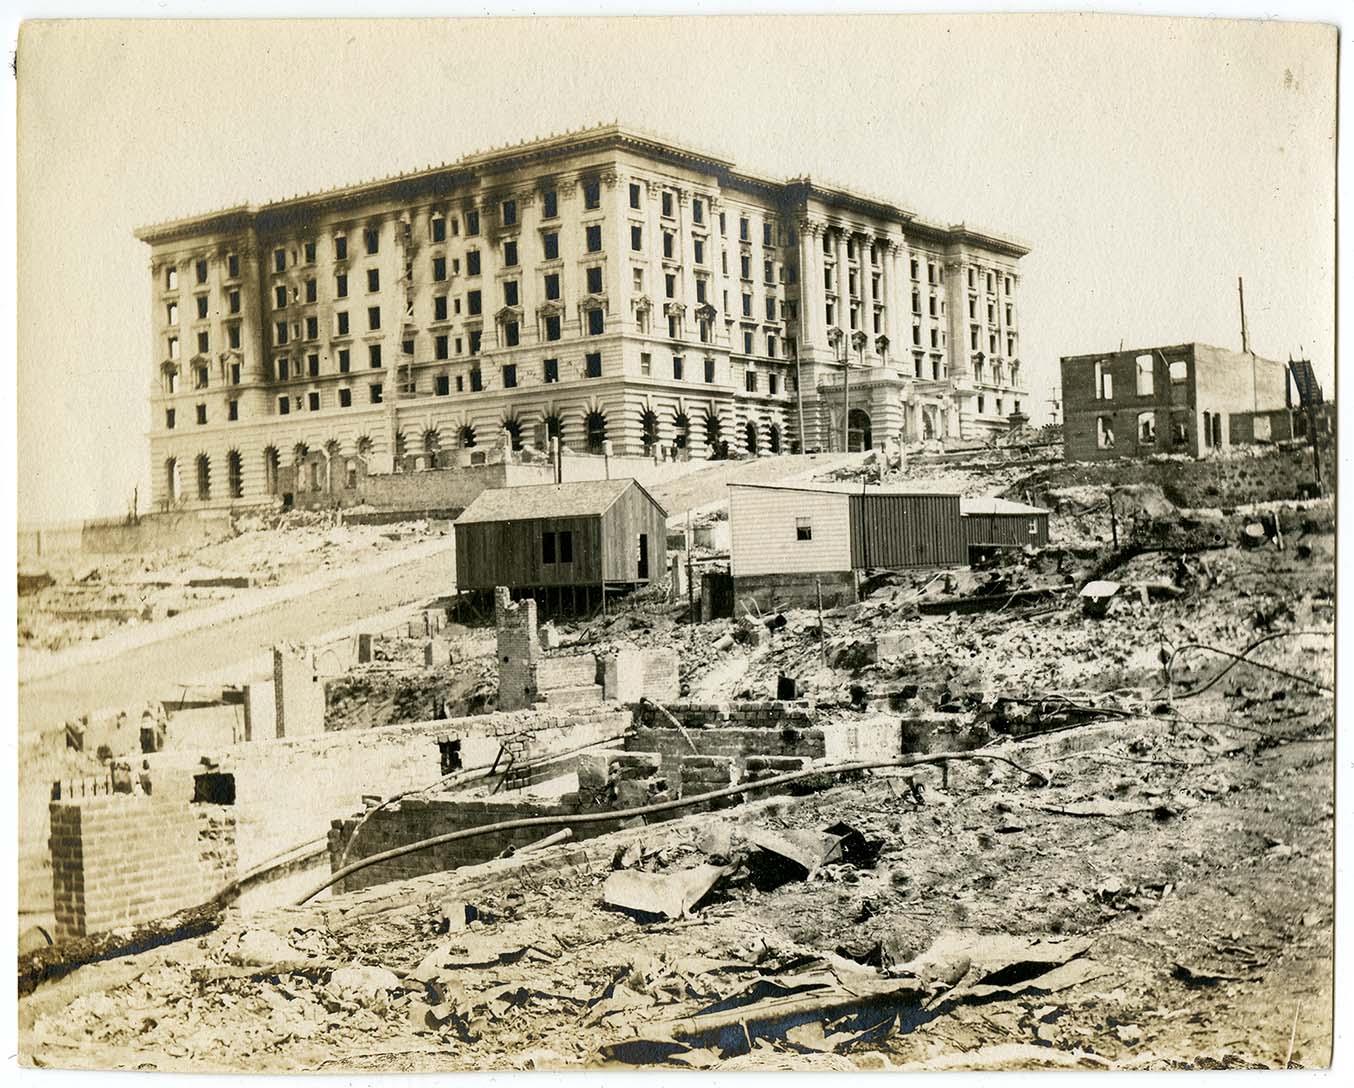 San Francisco's Fairmont Hotel after the 1906 earthquake